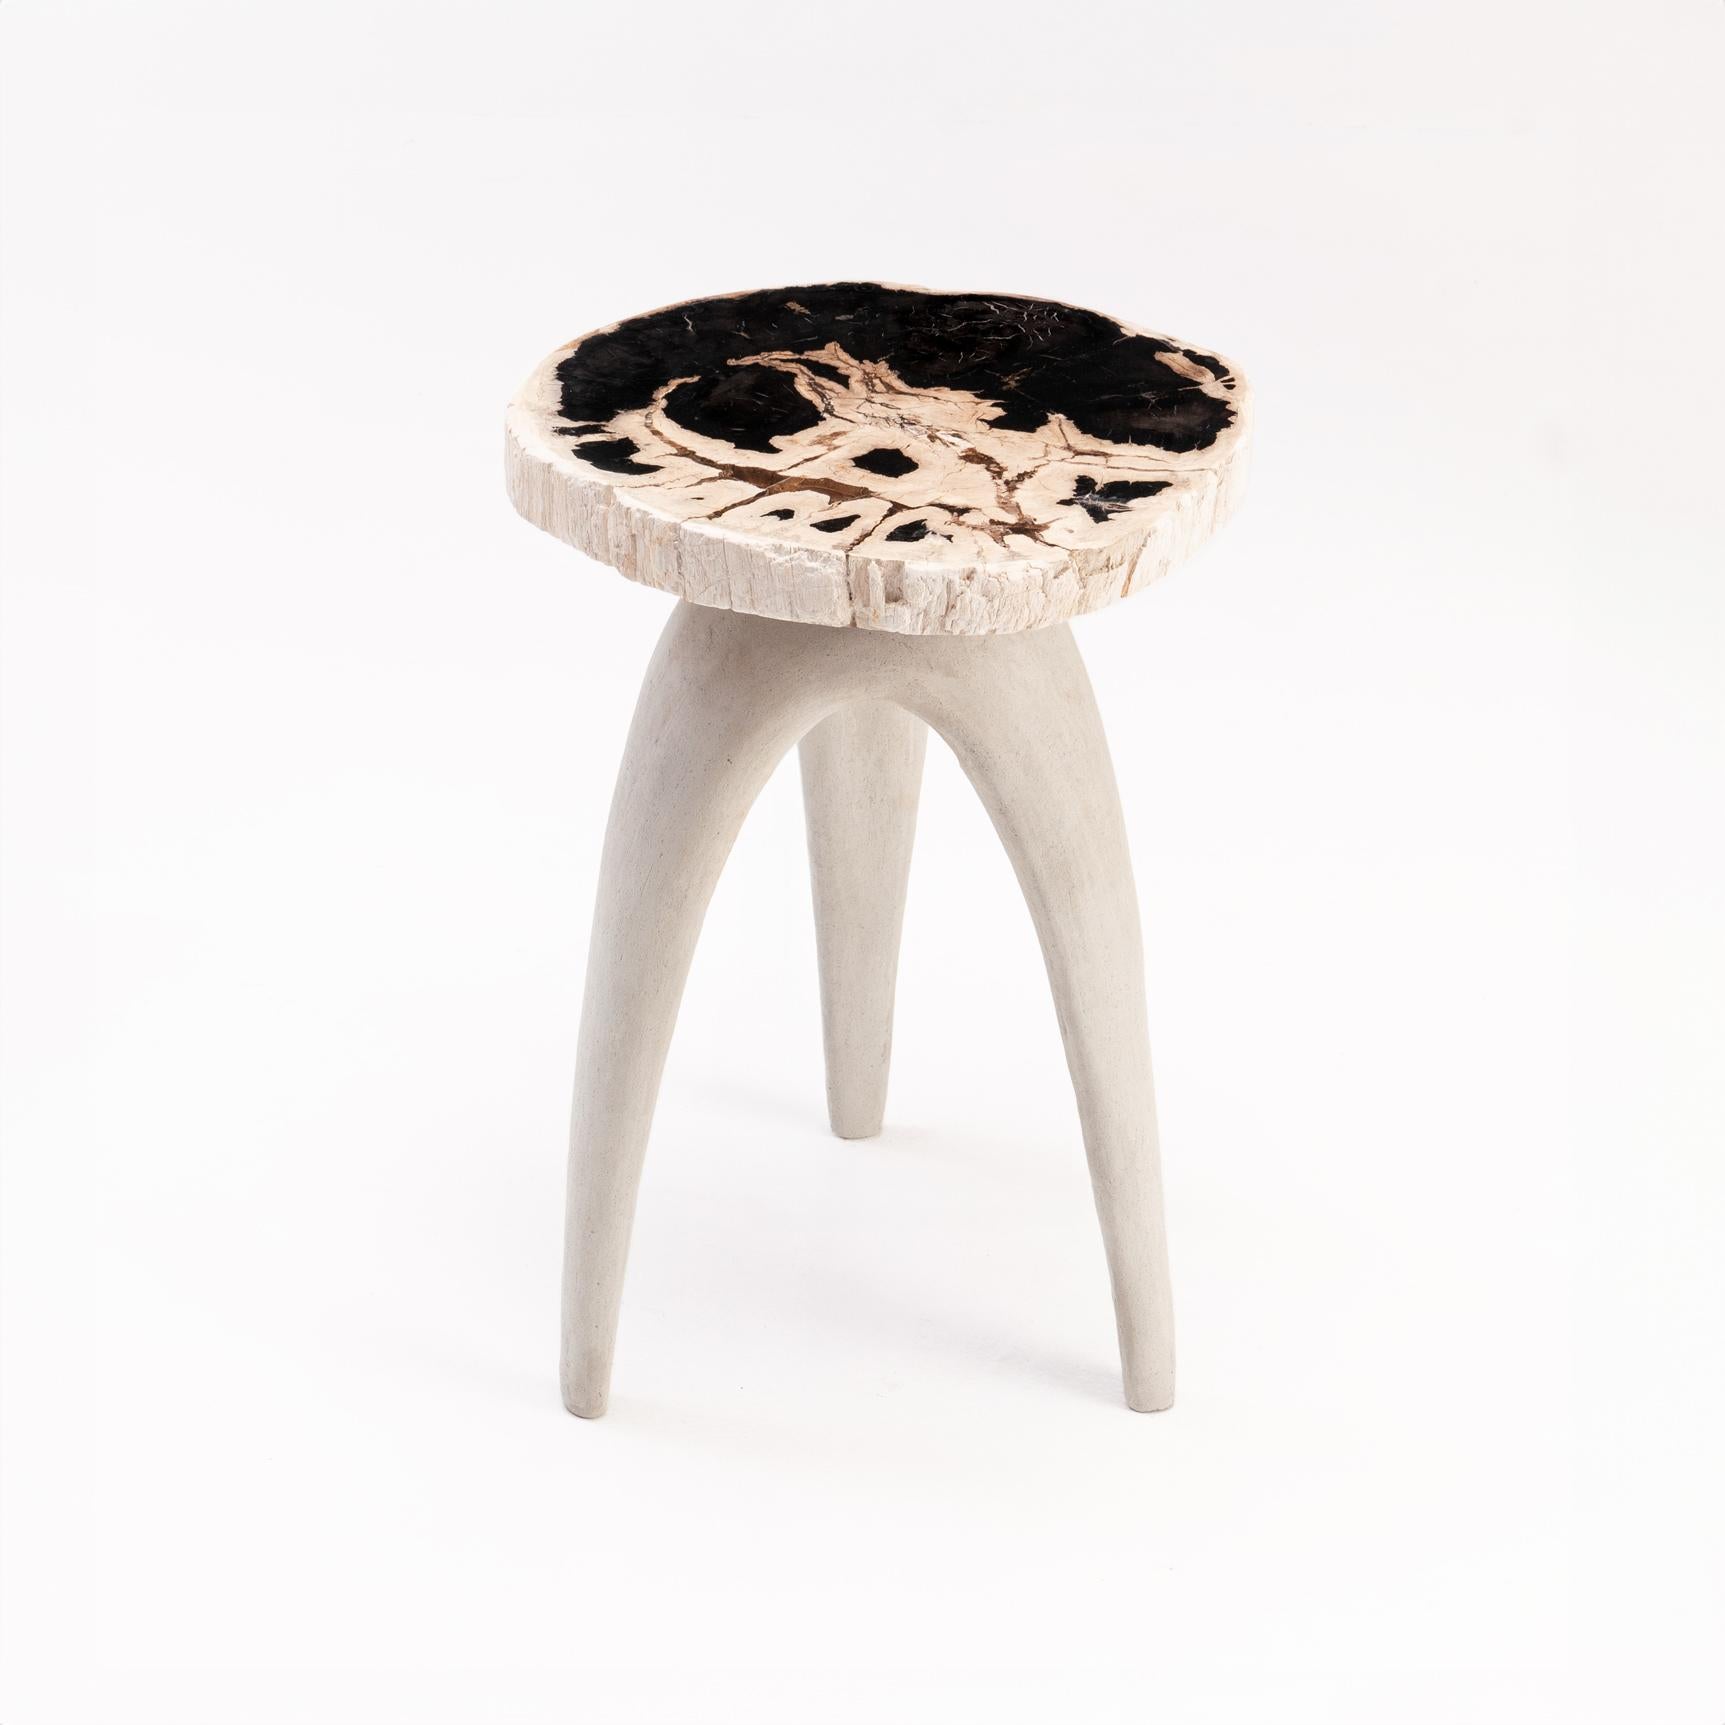 Bermuda Triangle Side Table by Odditi
Dimensions: W 45 x D 42 x H 65 cm
Materials: Petrified Wood, Limestone Composite (Light Colour), Lava Stone Composite (Dark Colour), Steel

The ‘Bermuda Triangle’ sculptural side-table features a solid petrified